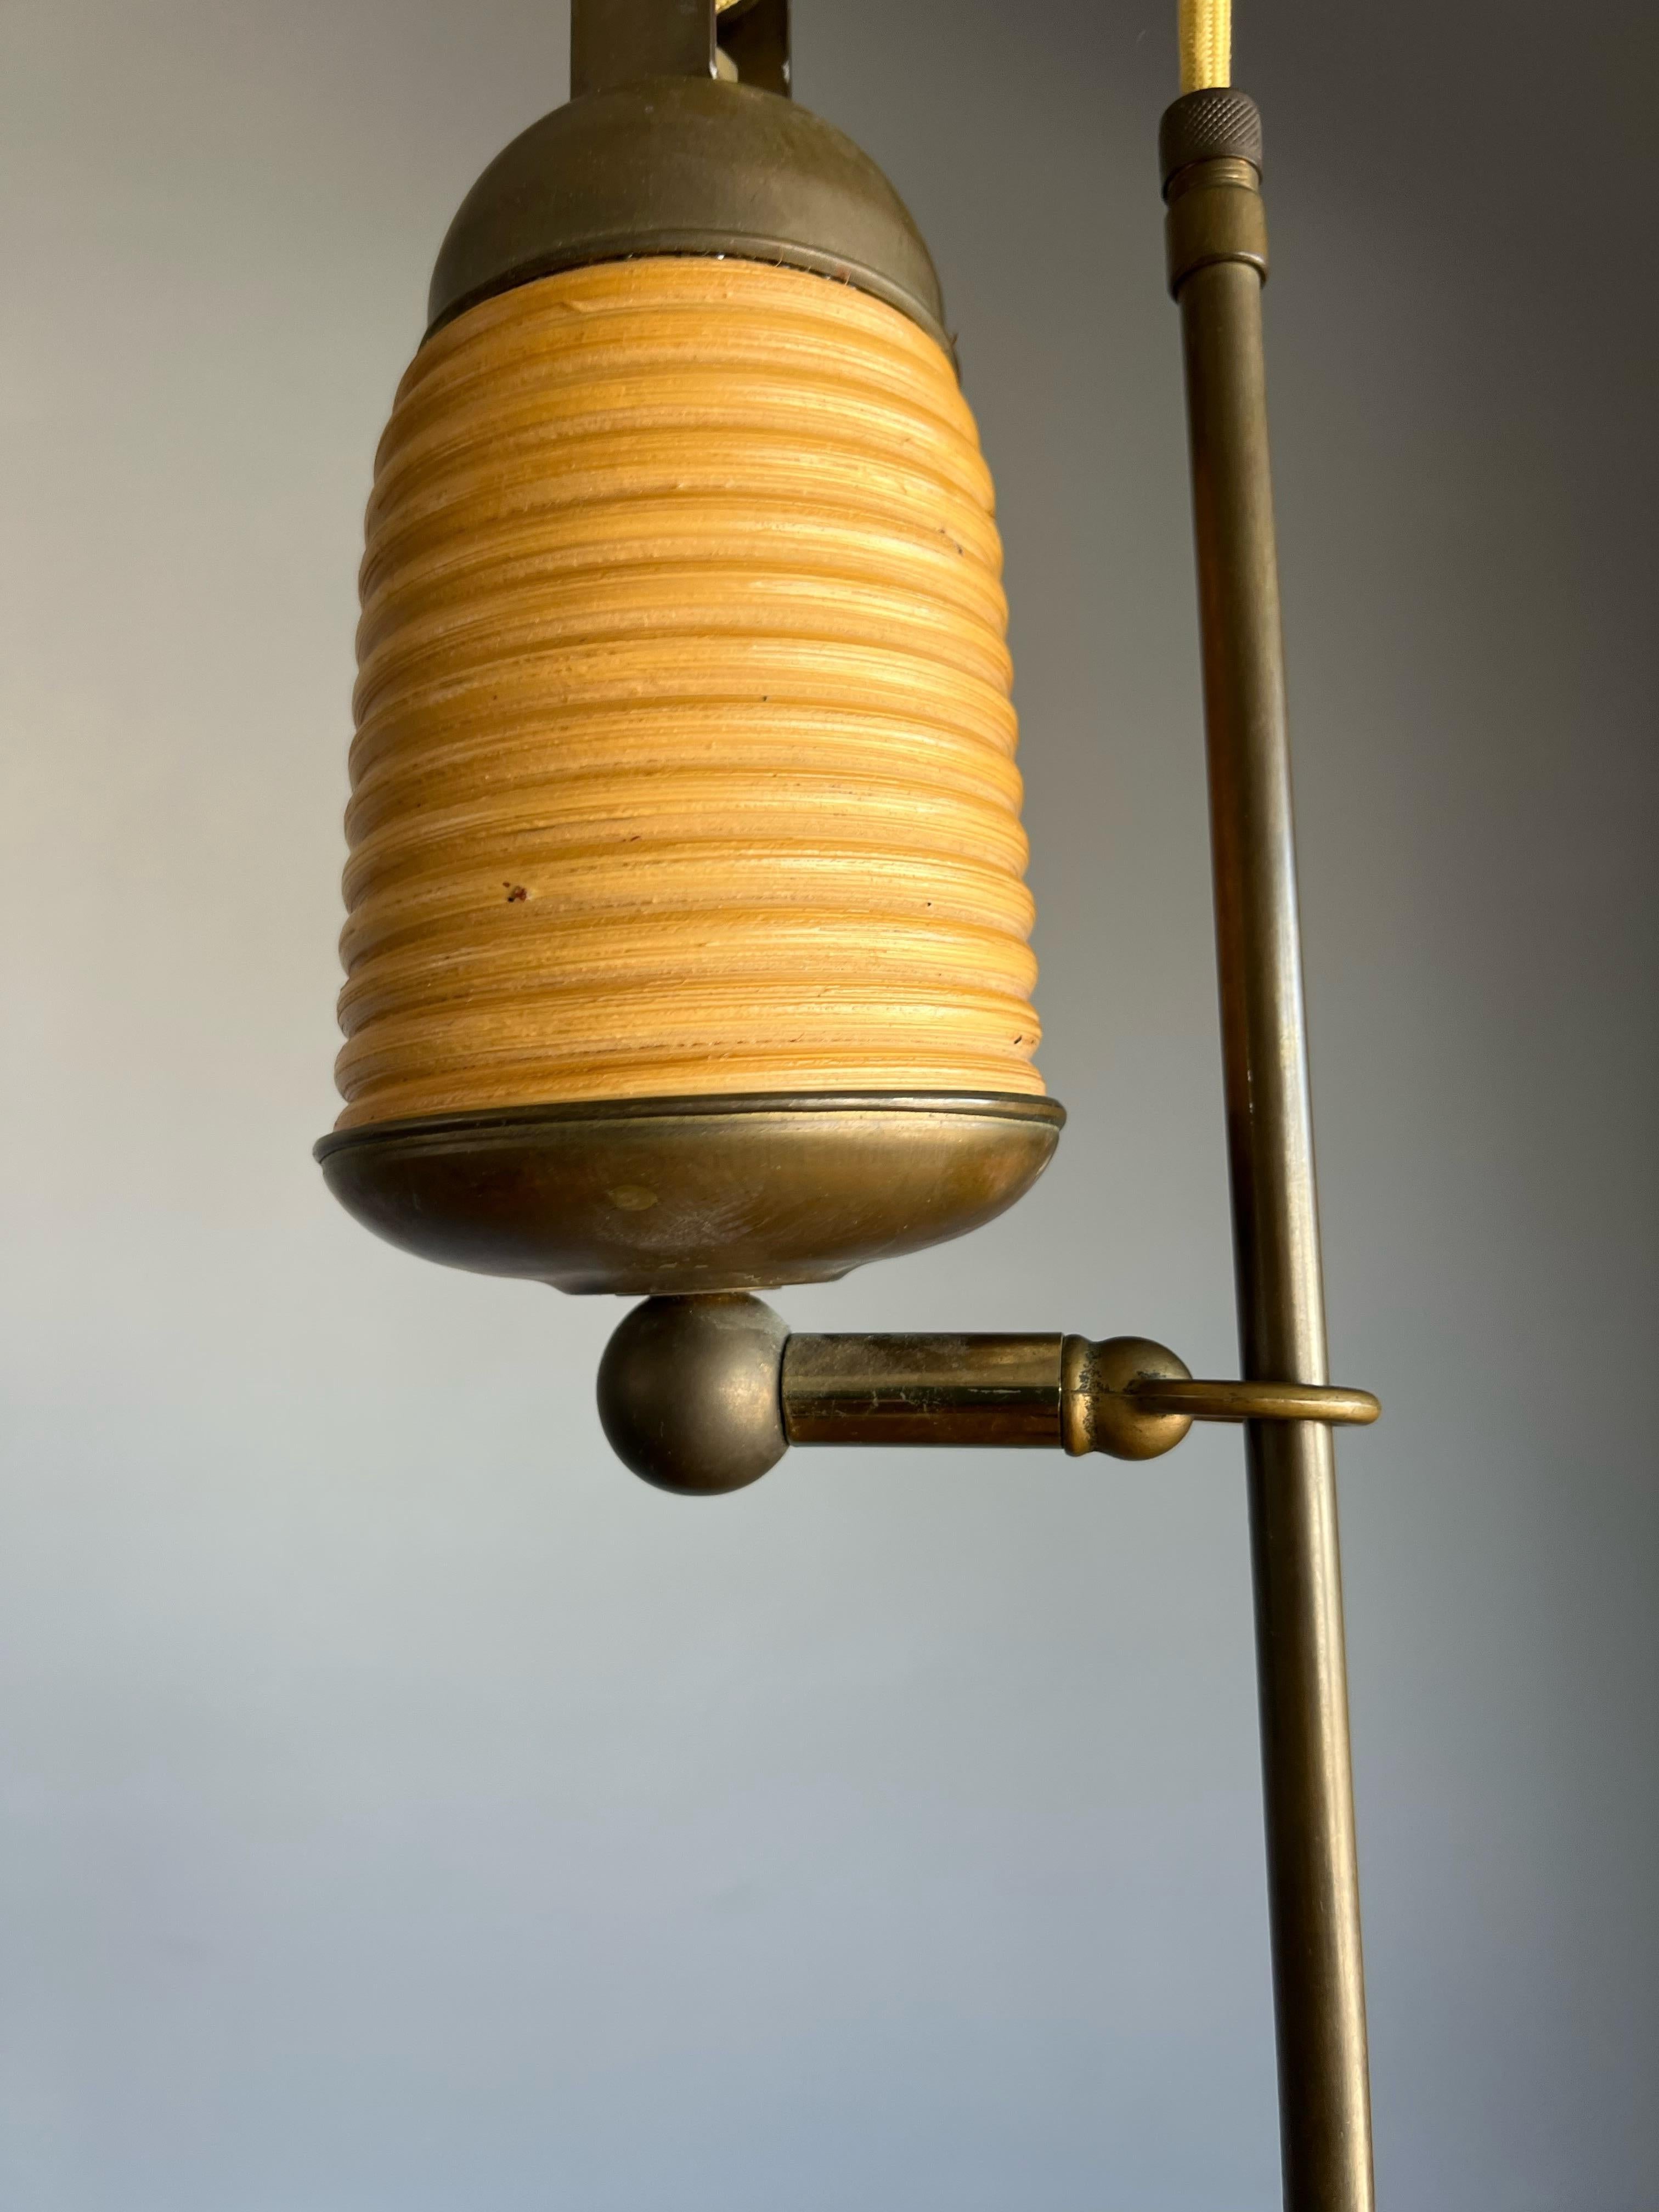 20th Century Rare Handcrafted Mid-Century Modern Rattan & Brass Pendant Light / Ceiling Lamp For Sale